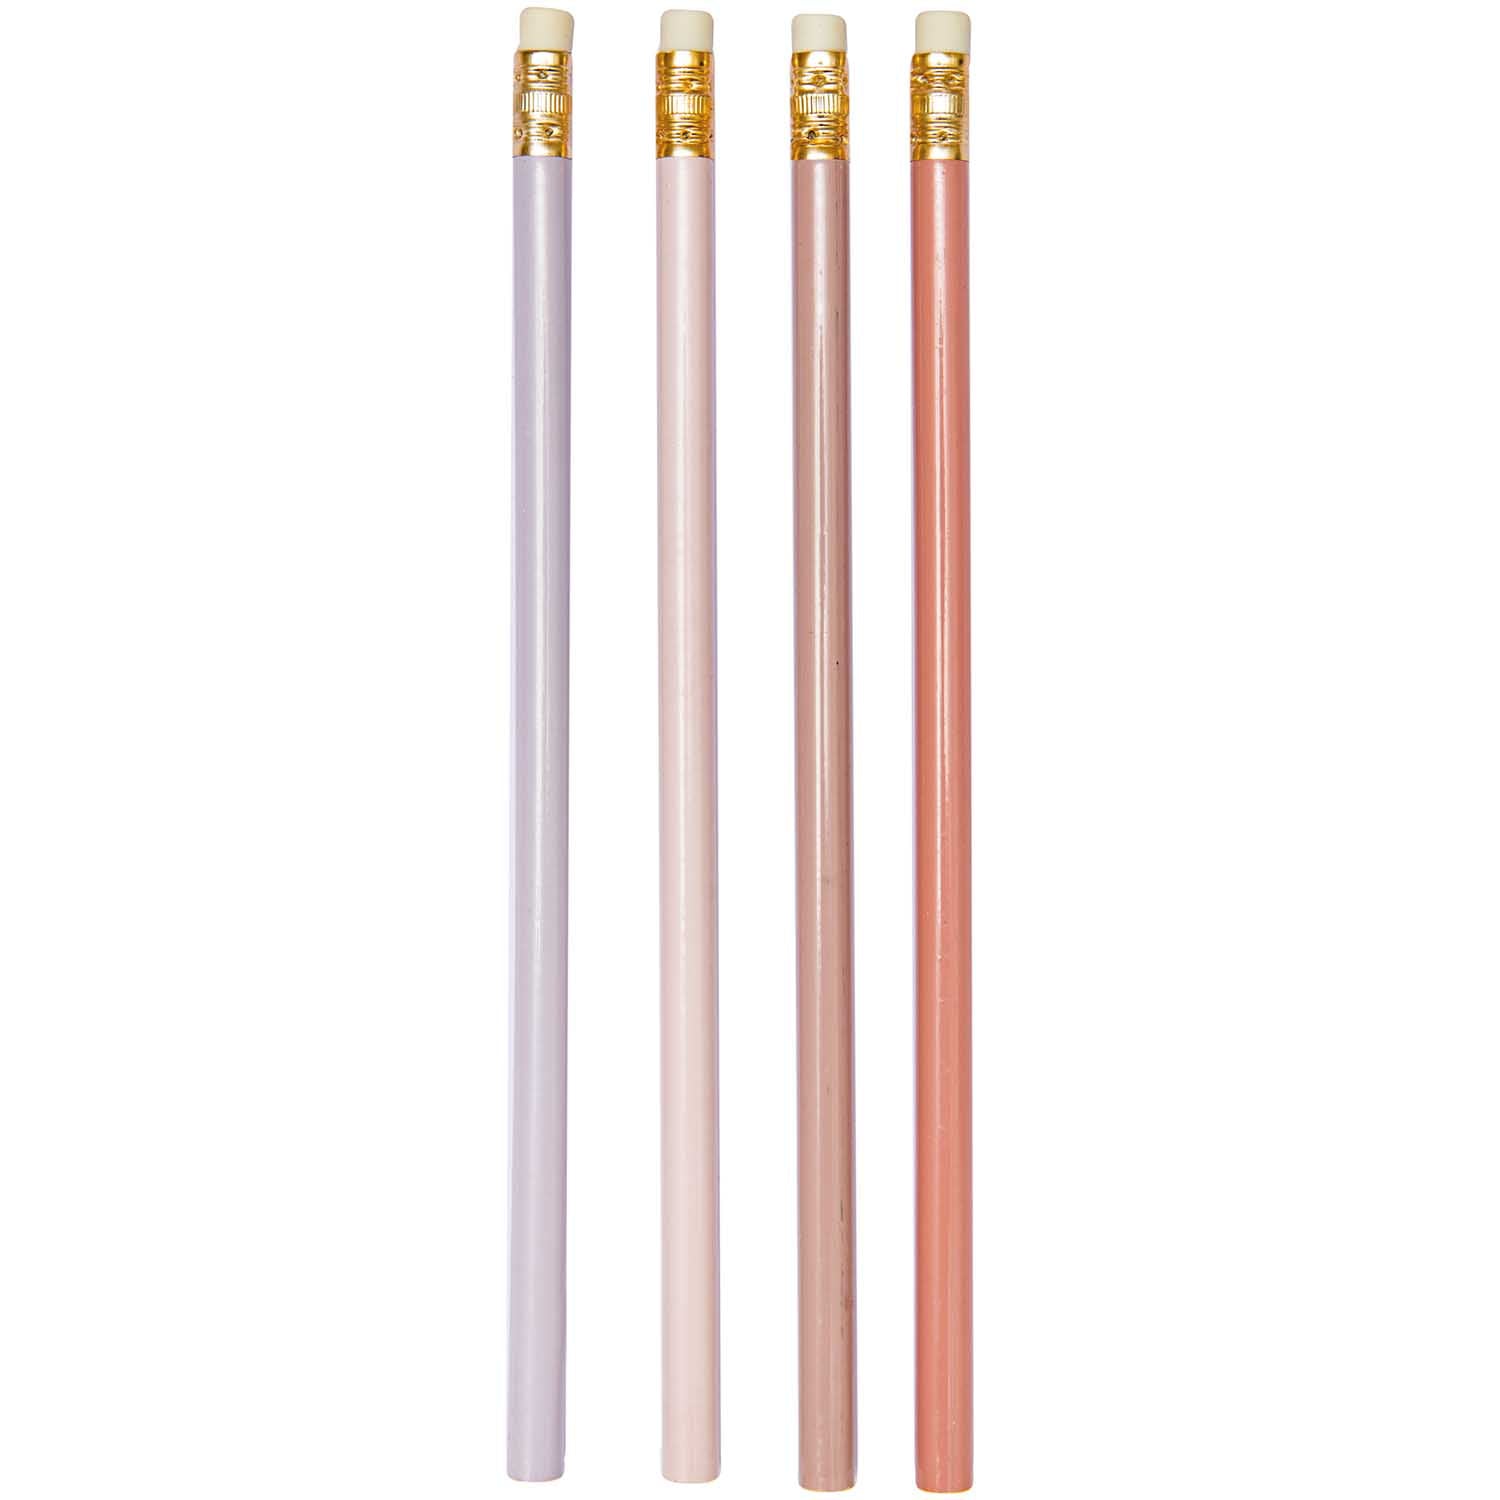 Paper Poetry Pencil - Set of 4